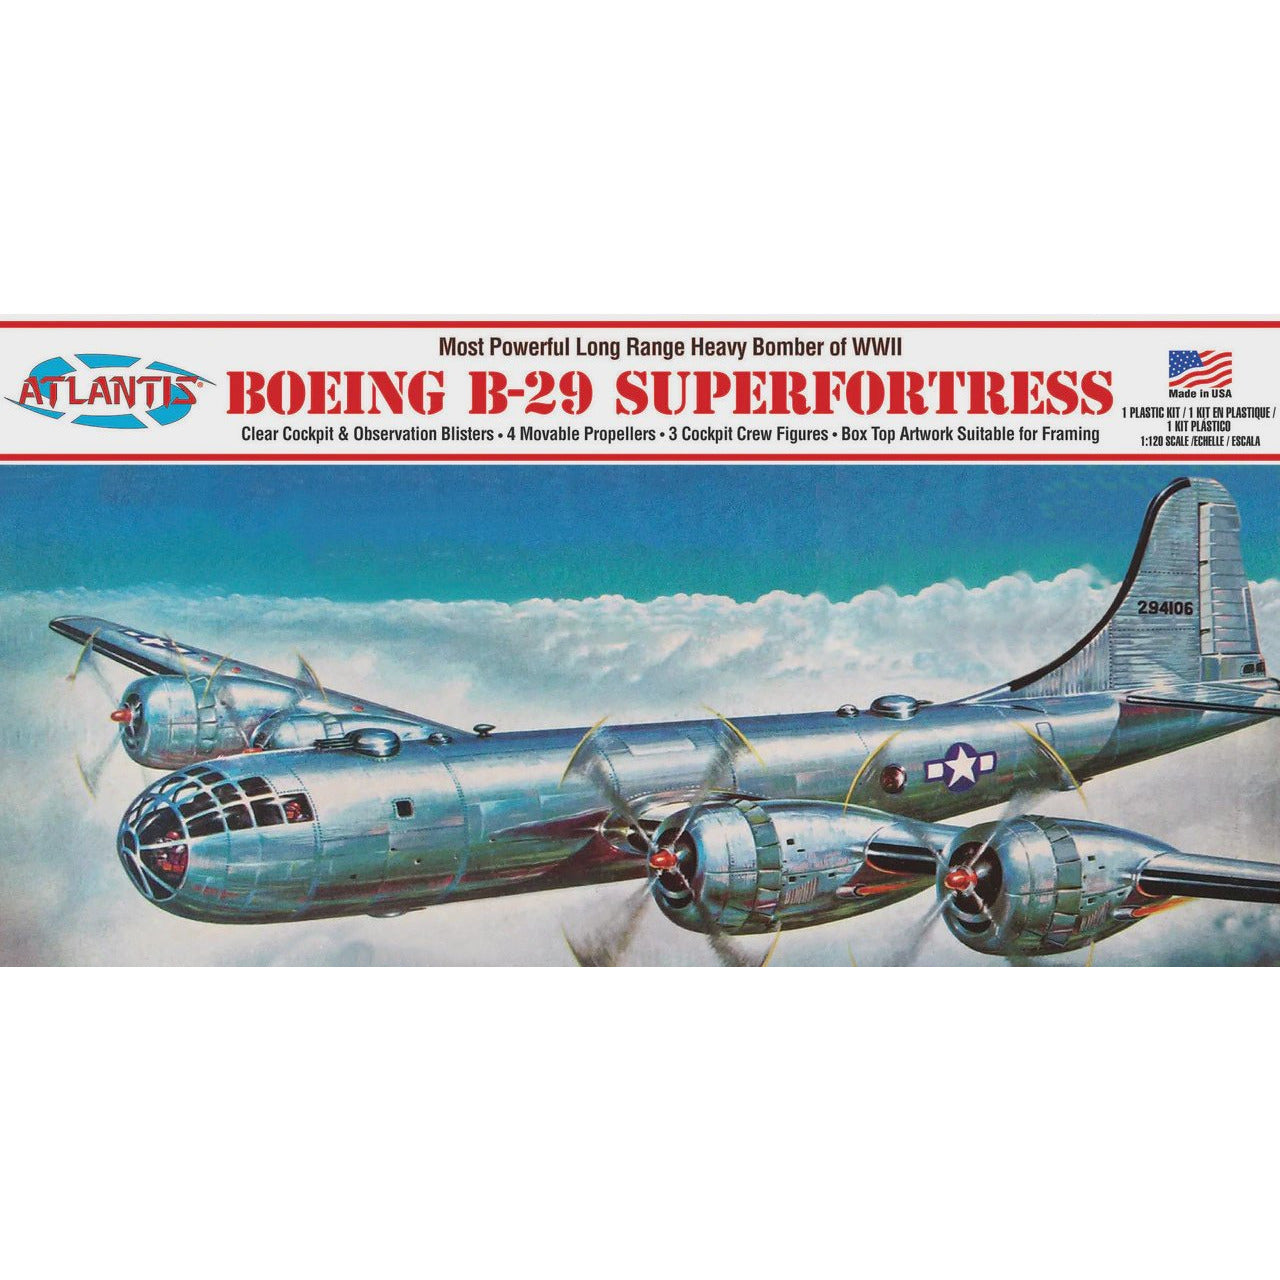 Boeing B-29 Superfortress Bomber 1/120 #H208 by Atlantis